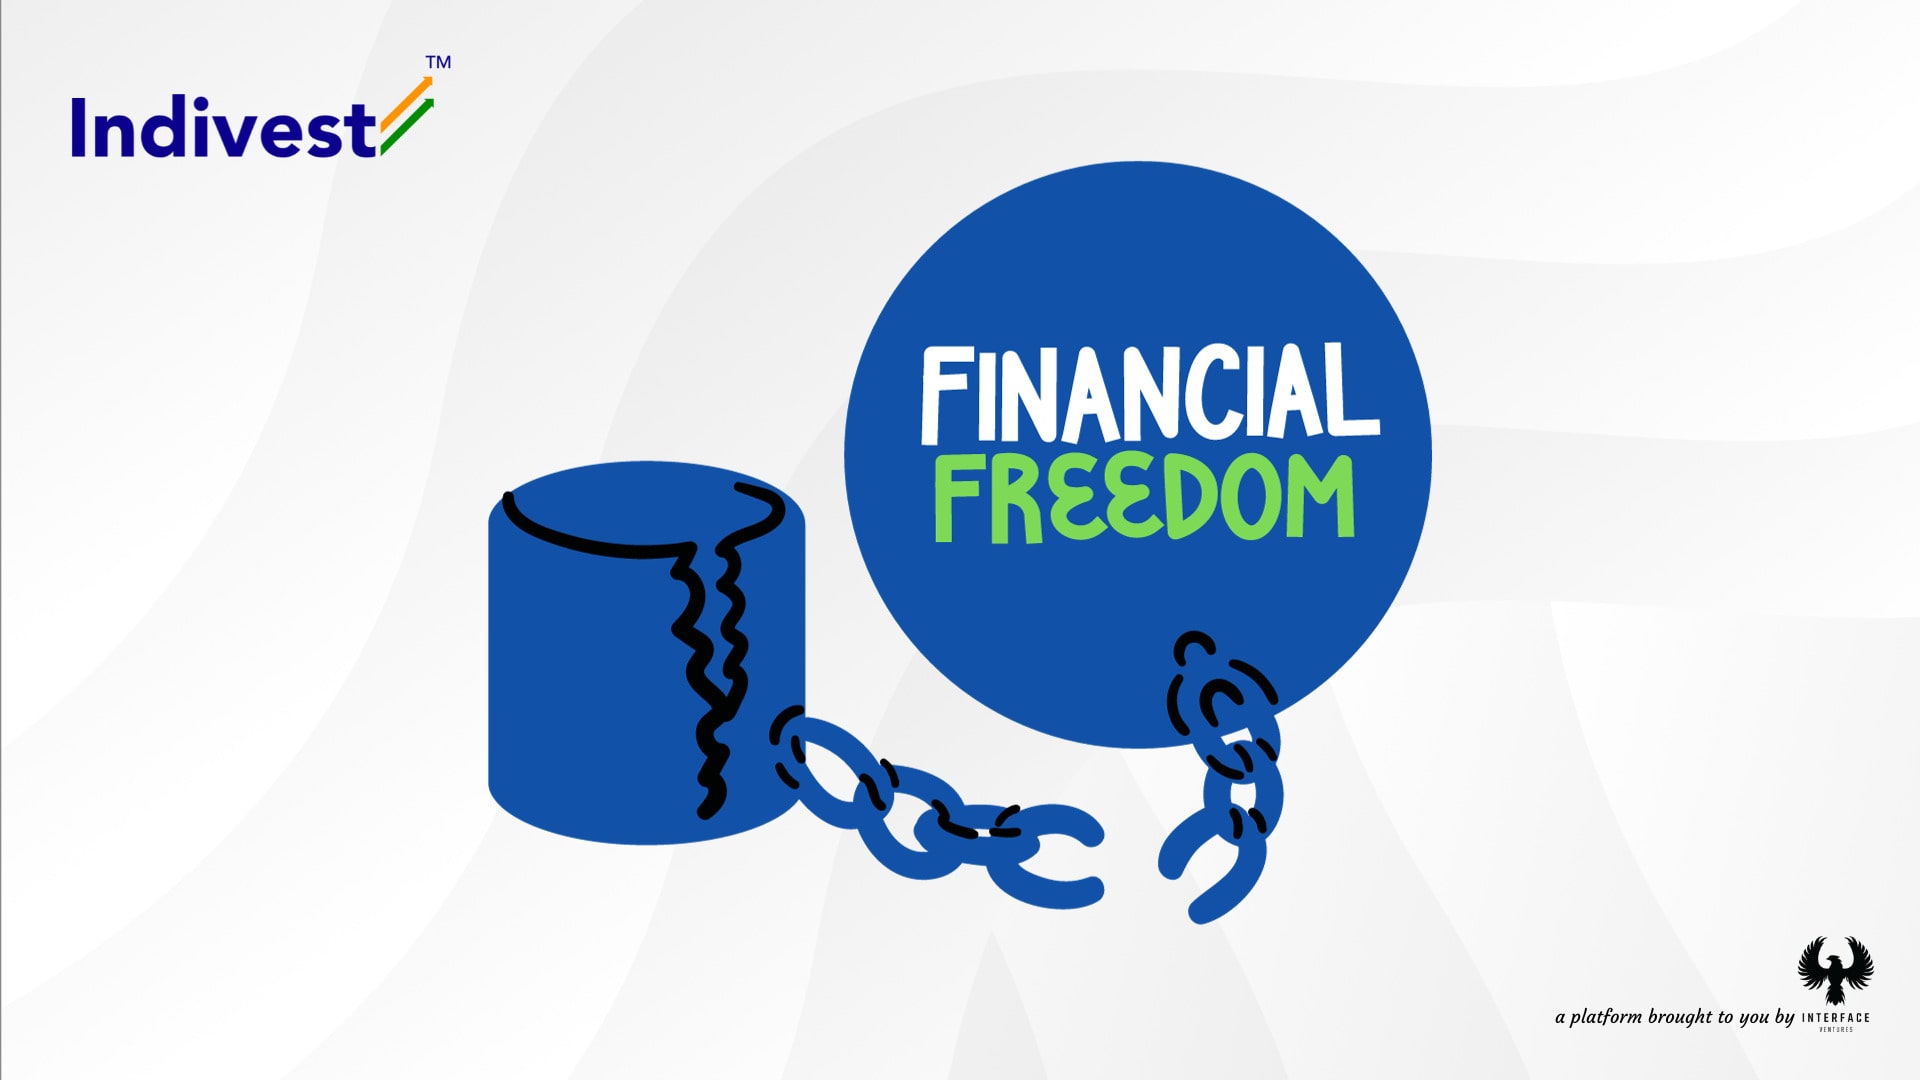 Financial freedom in India